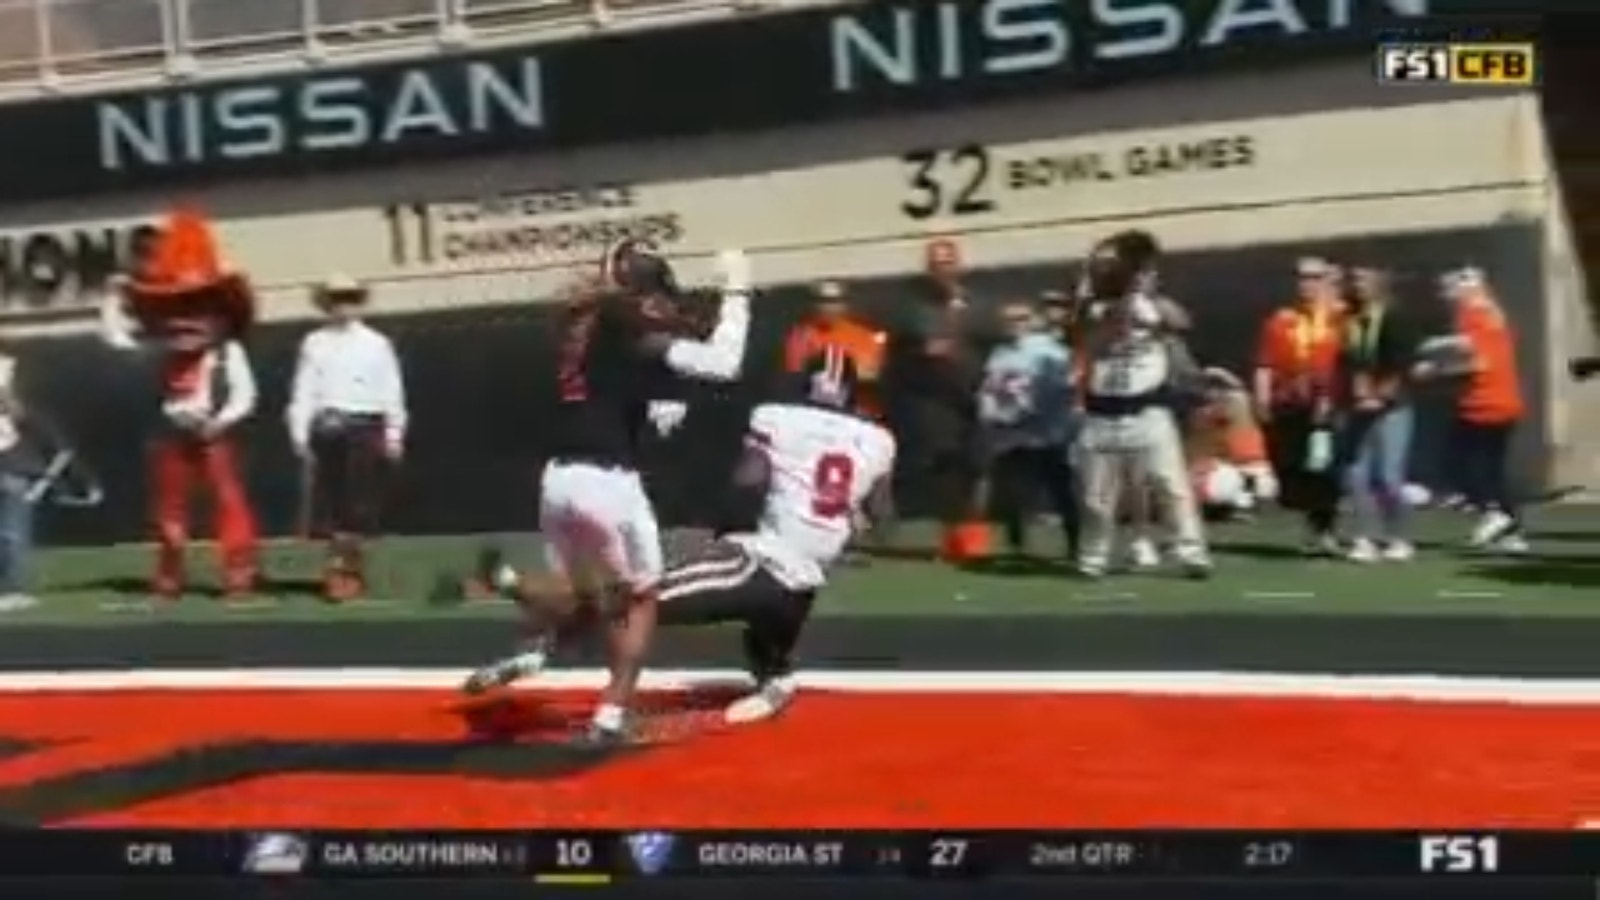 Texas Tech takes an early 7-0 lead after Buren Morton finds Jerond Bradley for a 27-yard TD